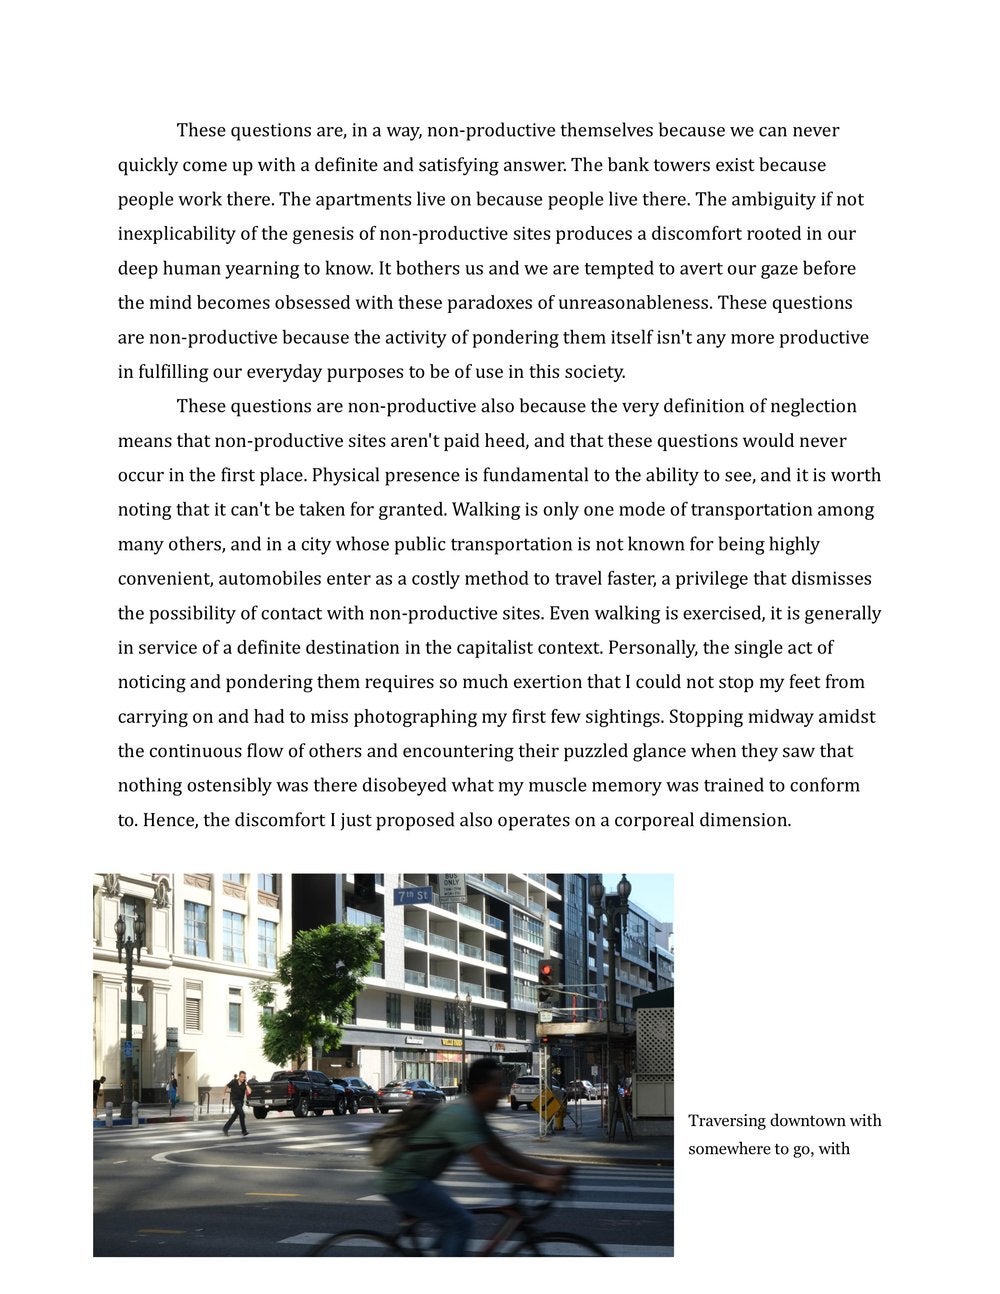 "Aestheticizing Non-Productive Sites within Public Space" by Xinyan Tong.